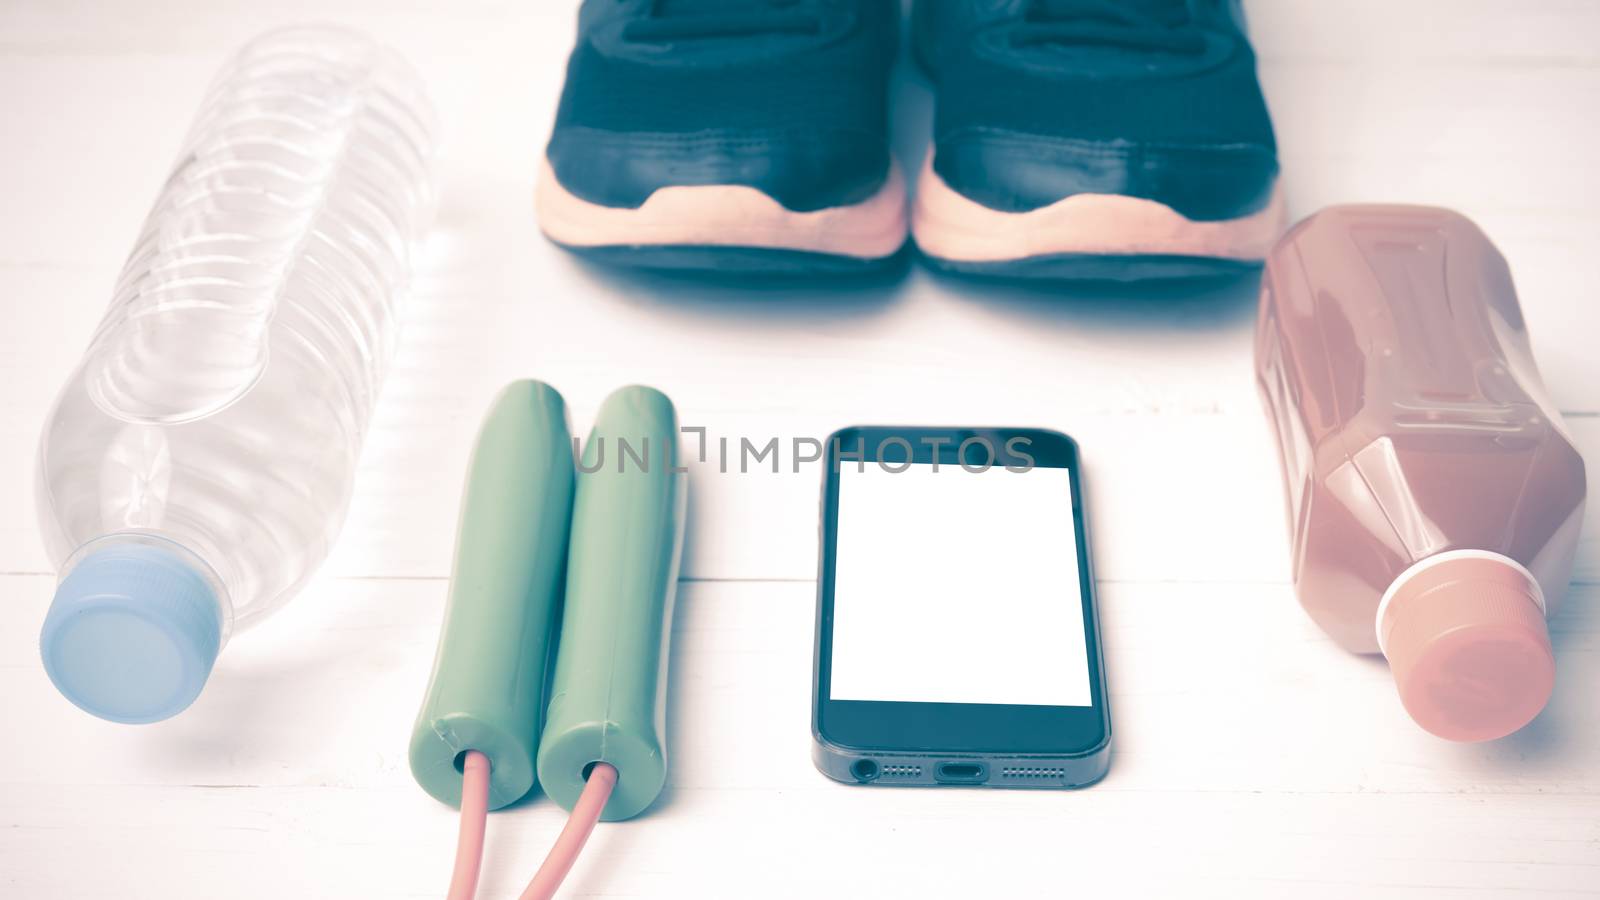 fitness equipment : running shoes,jumping rope,water,juice and phone on white wood background vintage style